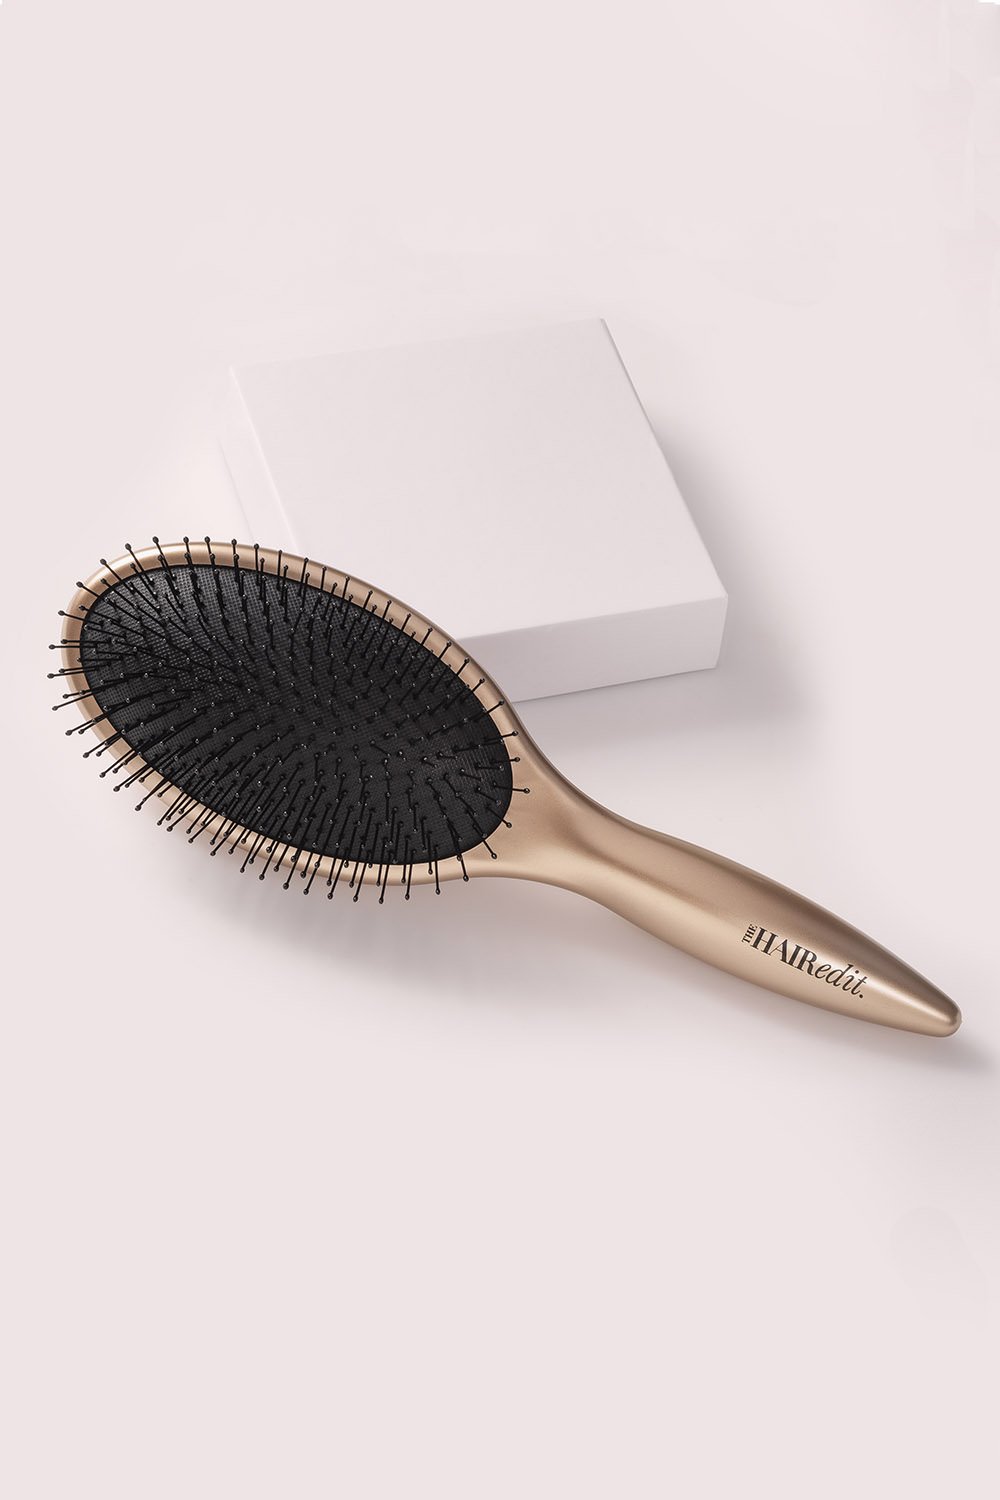 FREE The Hair Edit Comb (Apply to Try)